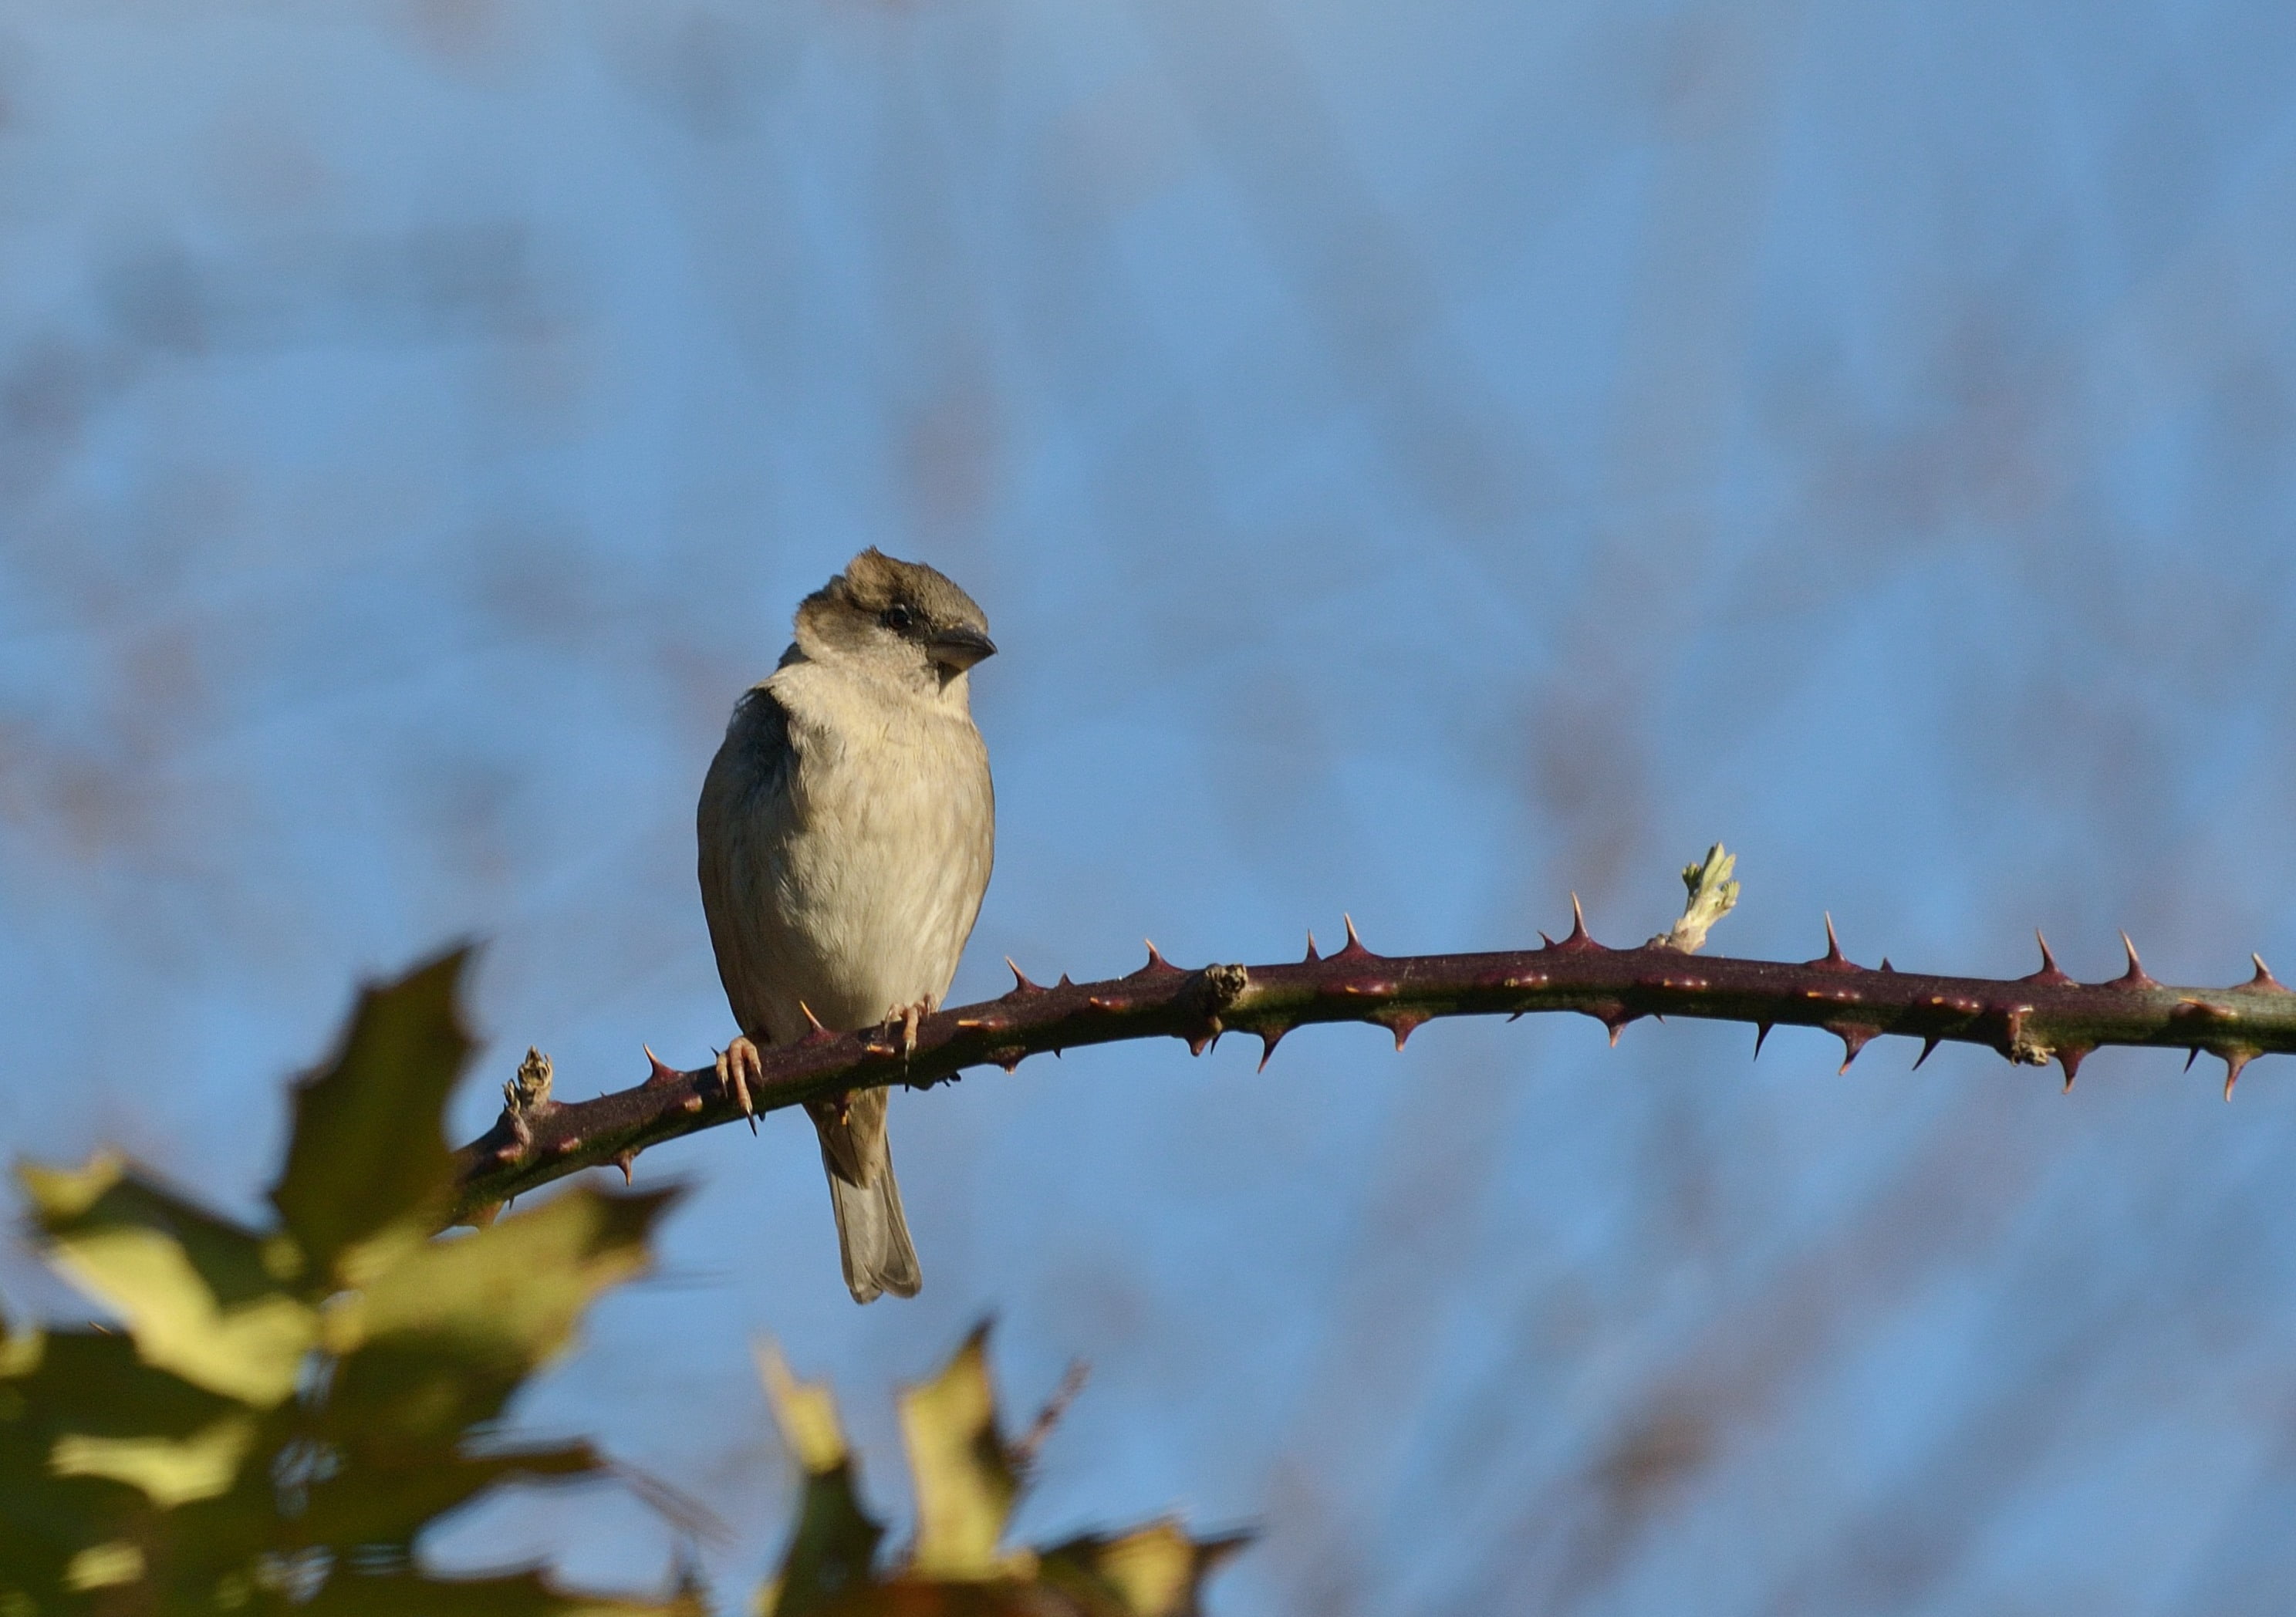 focus photography of white bird on spiky plant stem, chaffinch